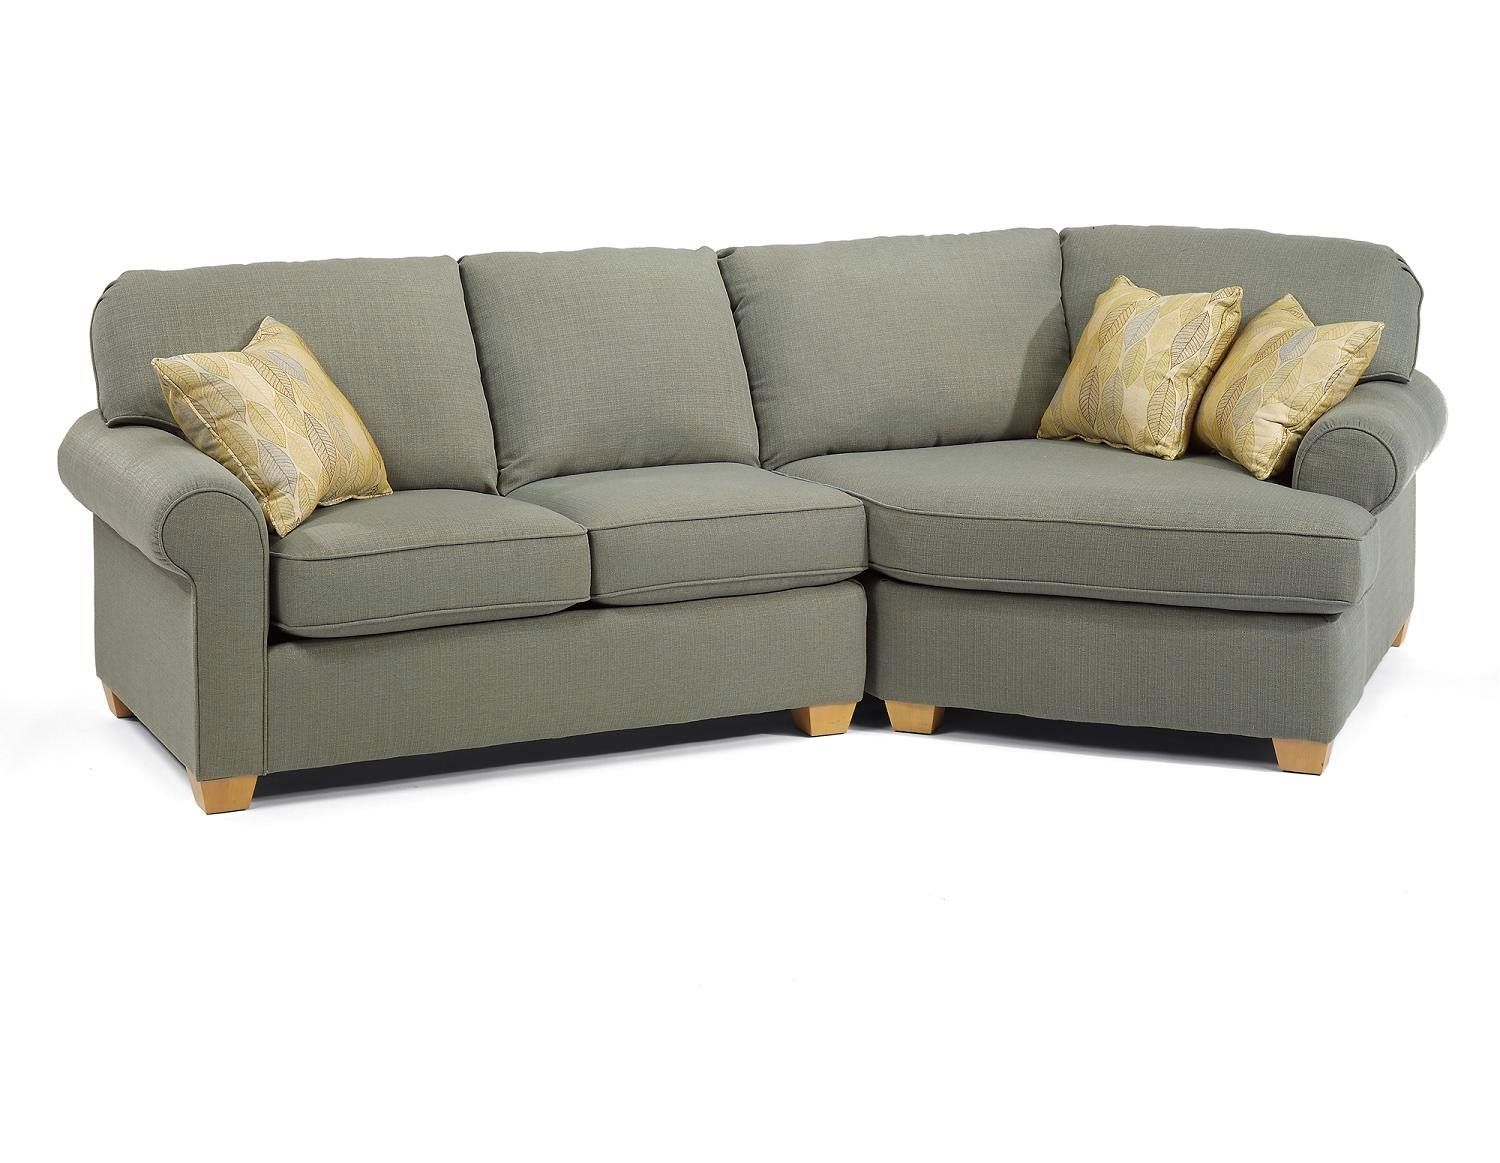 Small Sectional Sofa Small Sectional Sofa Basement Youtube Throughout Condo Sectional Sofas (View 8 of 15)